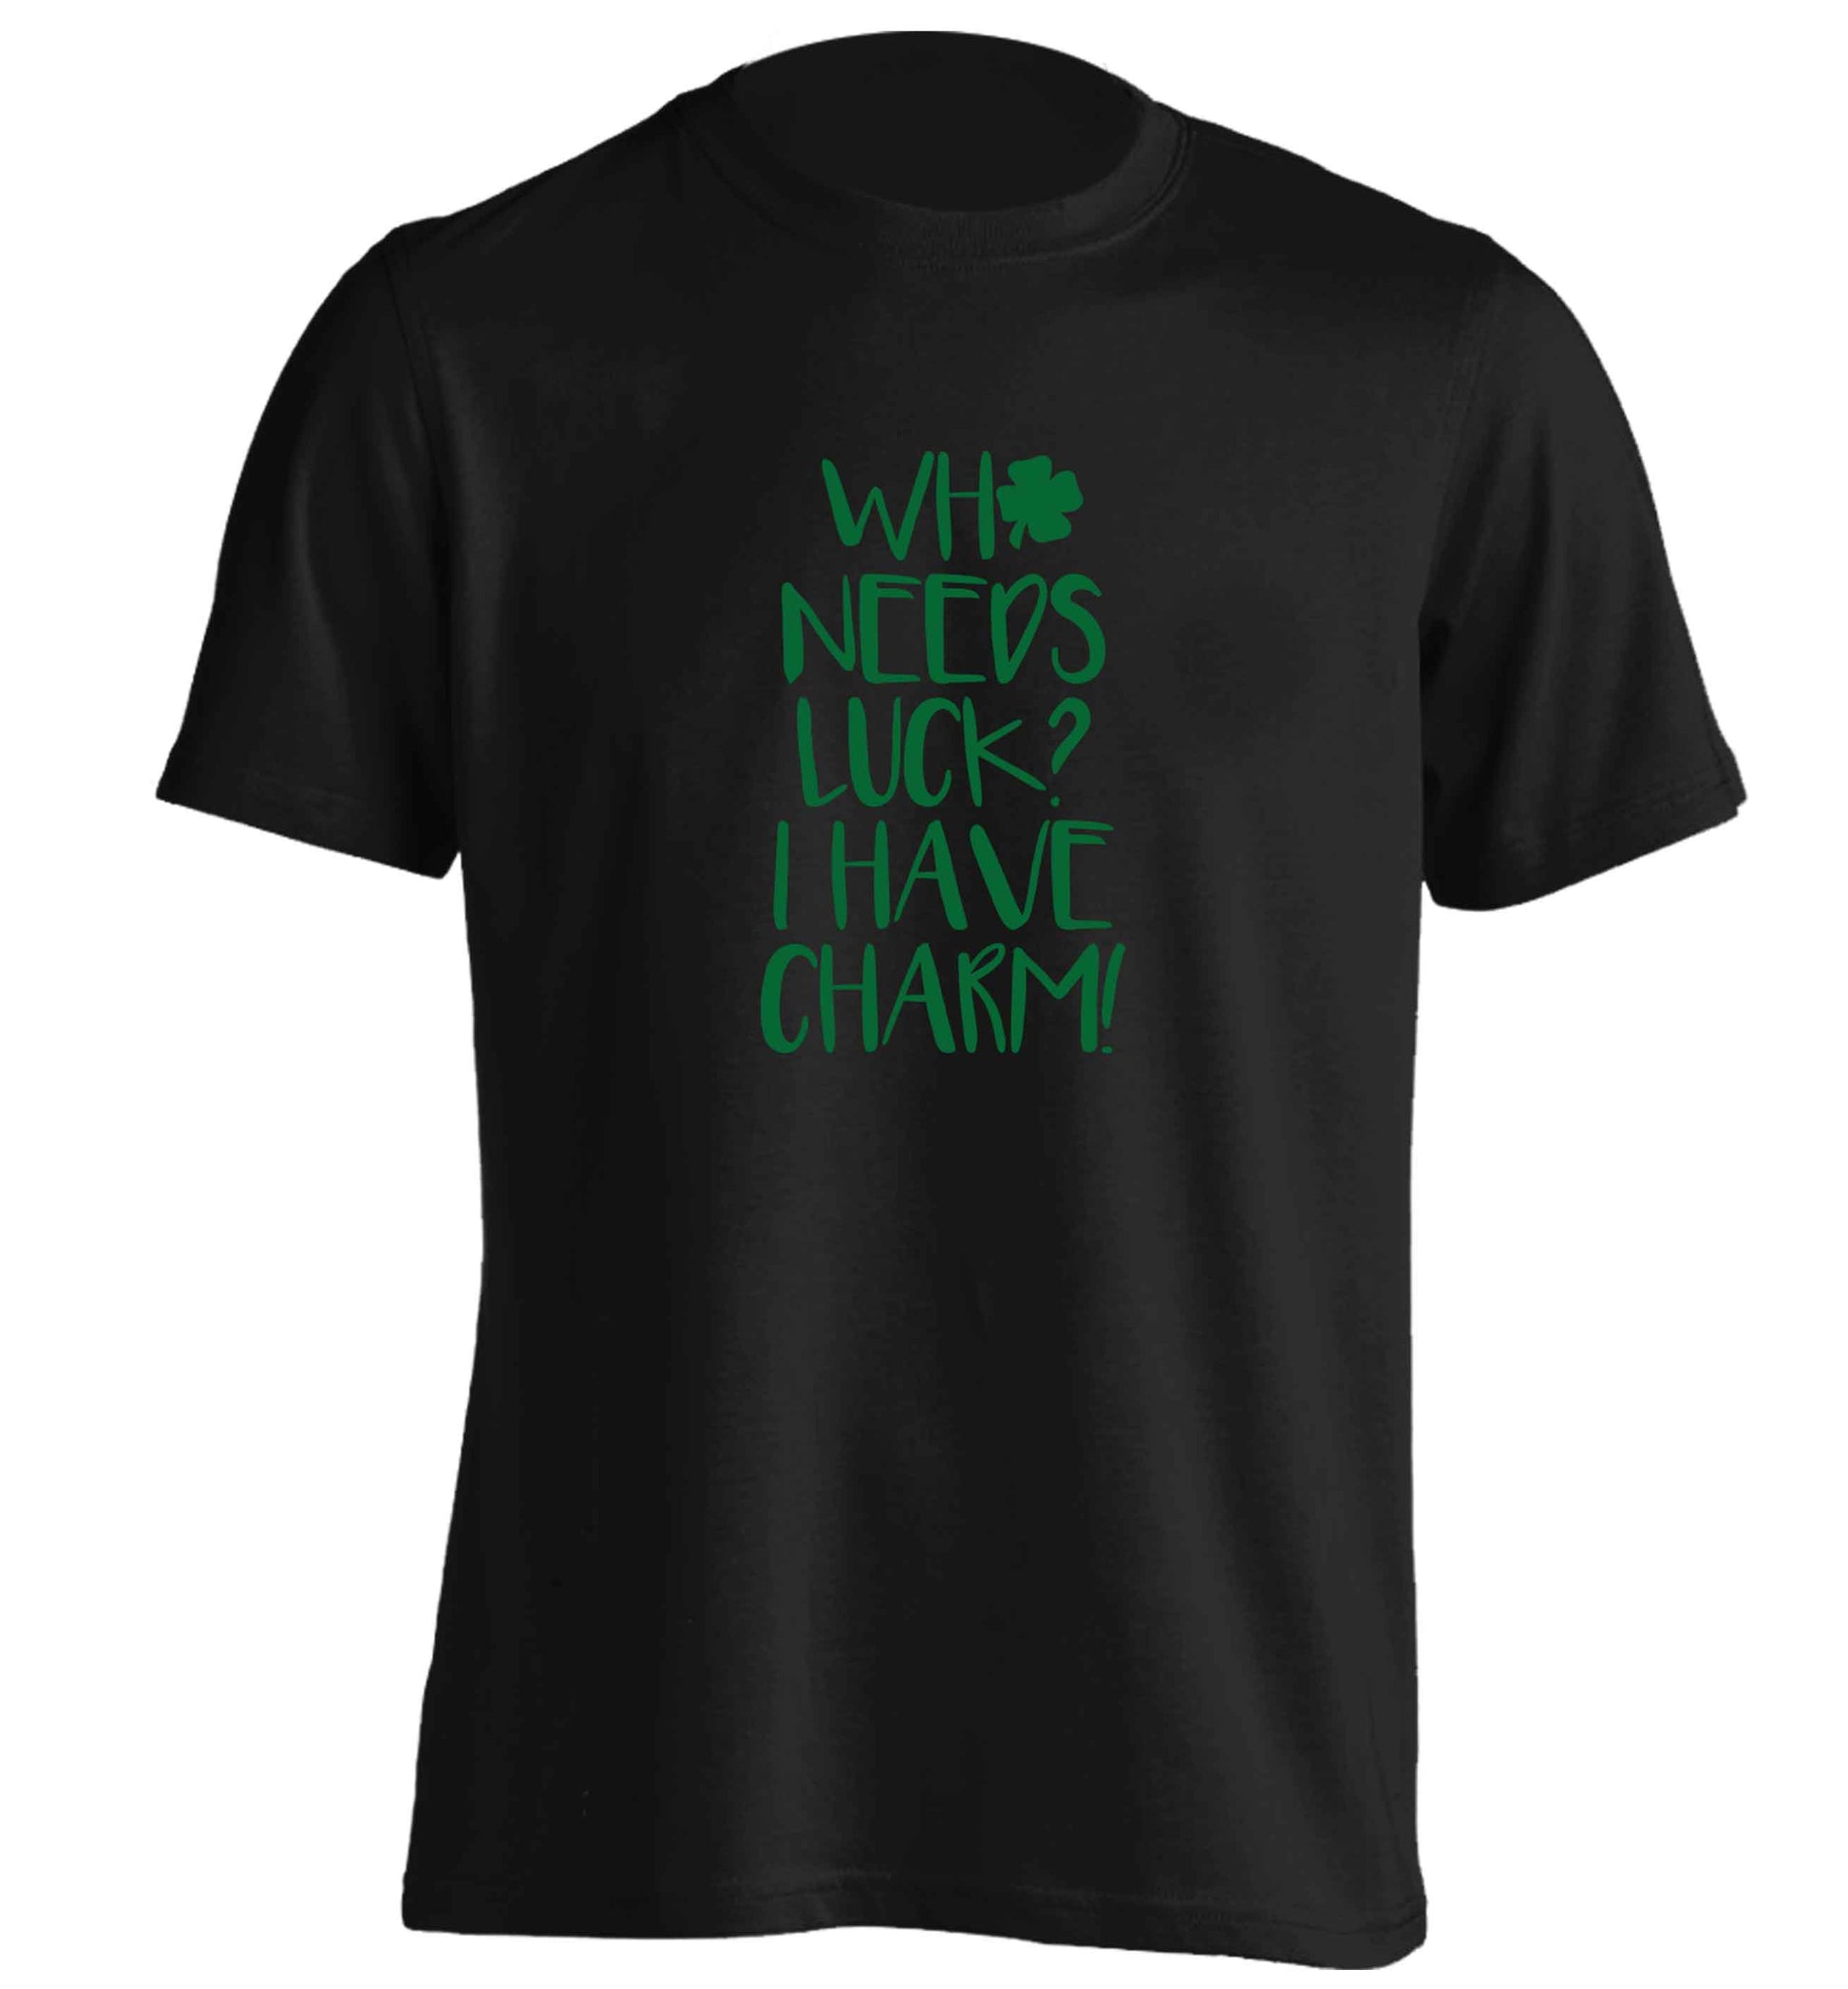 Who needs luck? I have charm! adults unisex black Tshirt 2XL